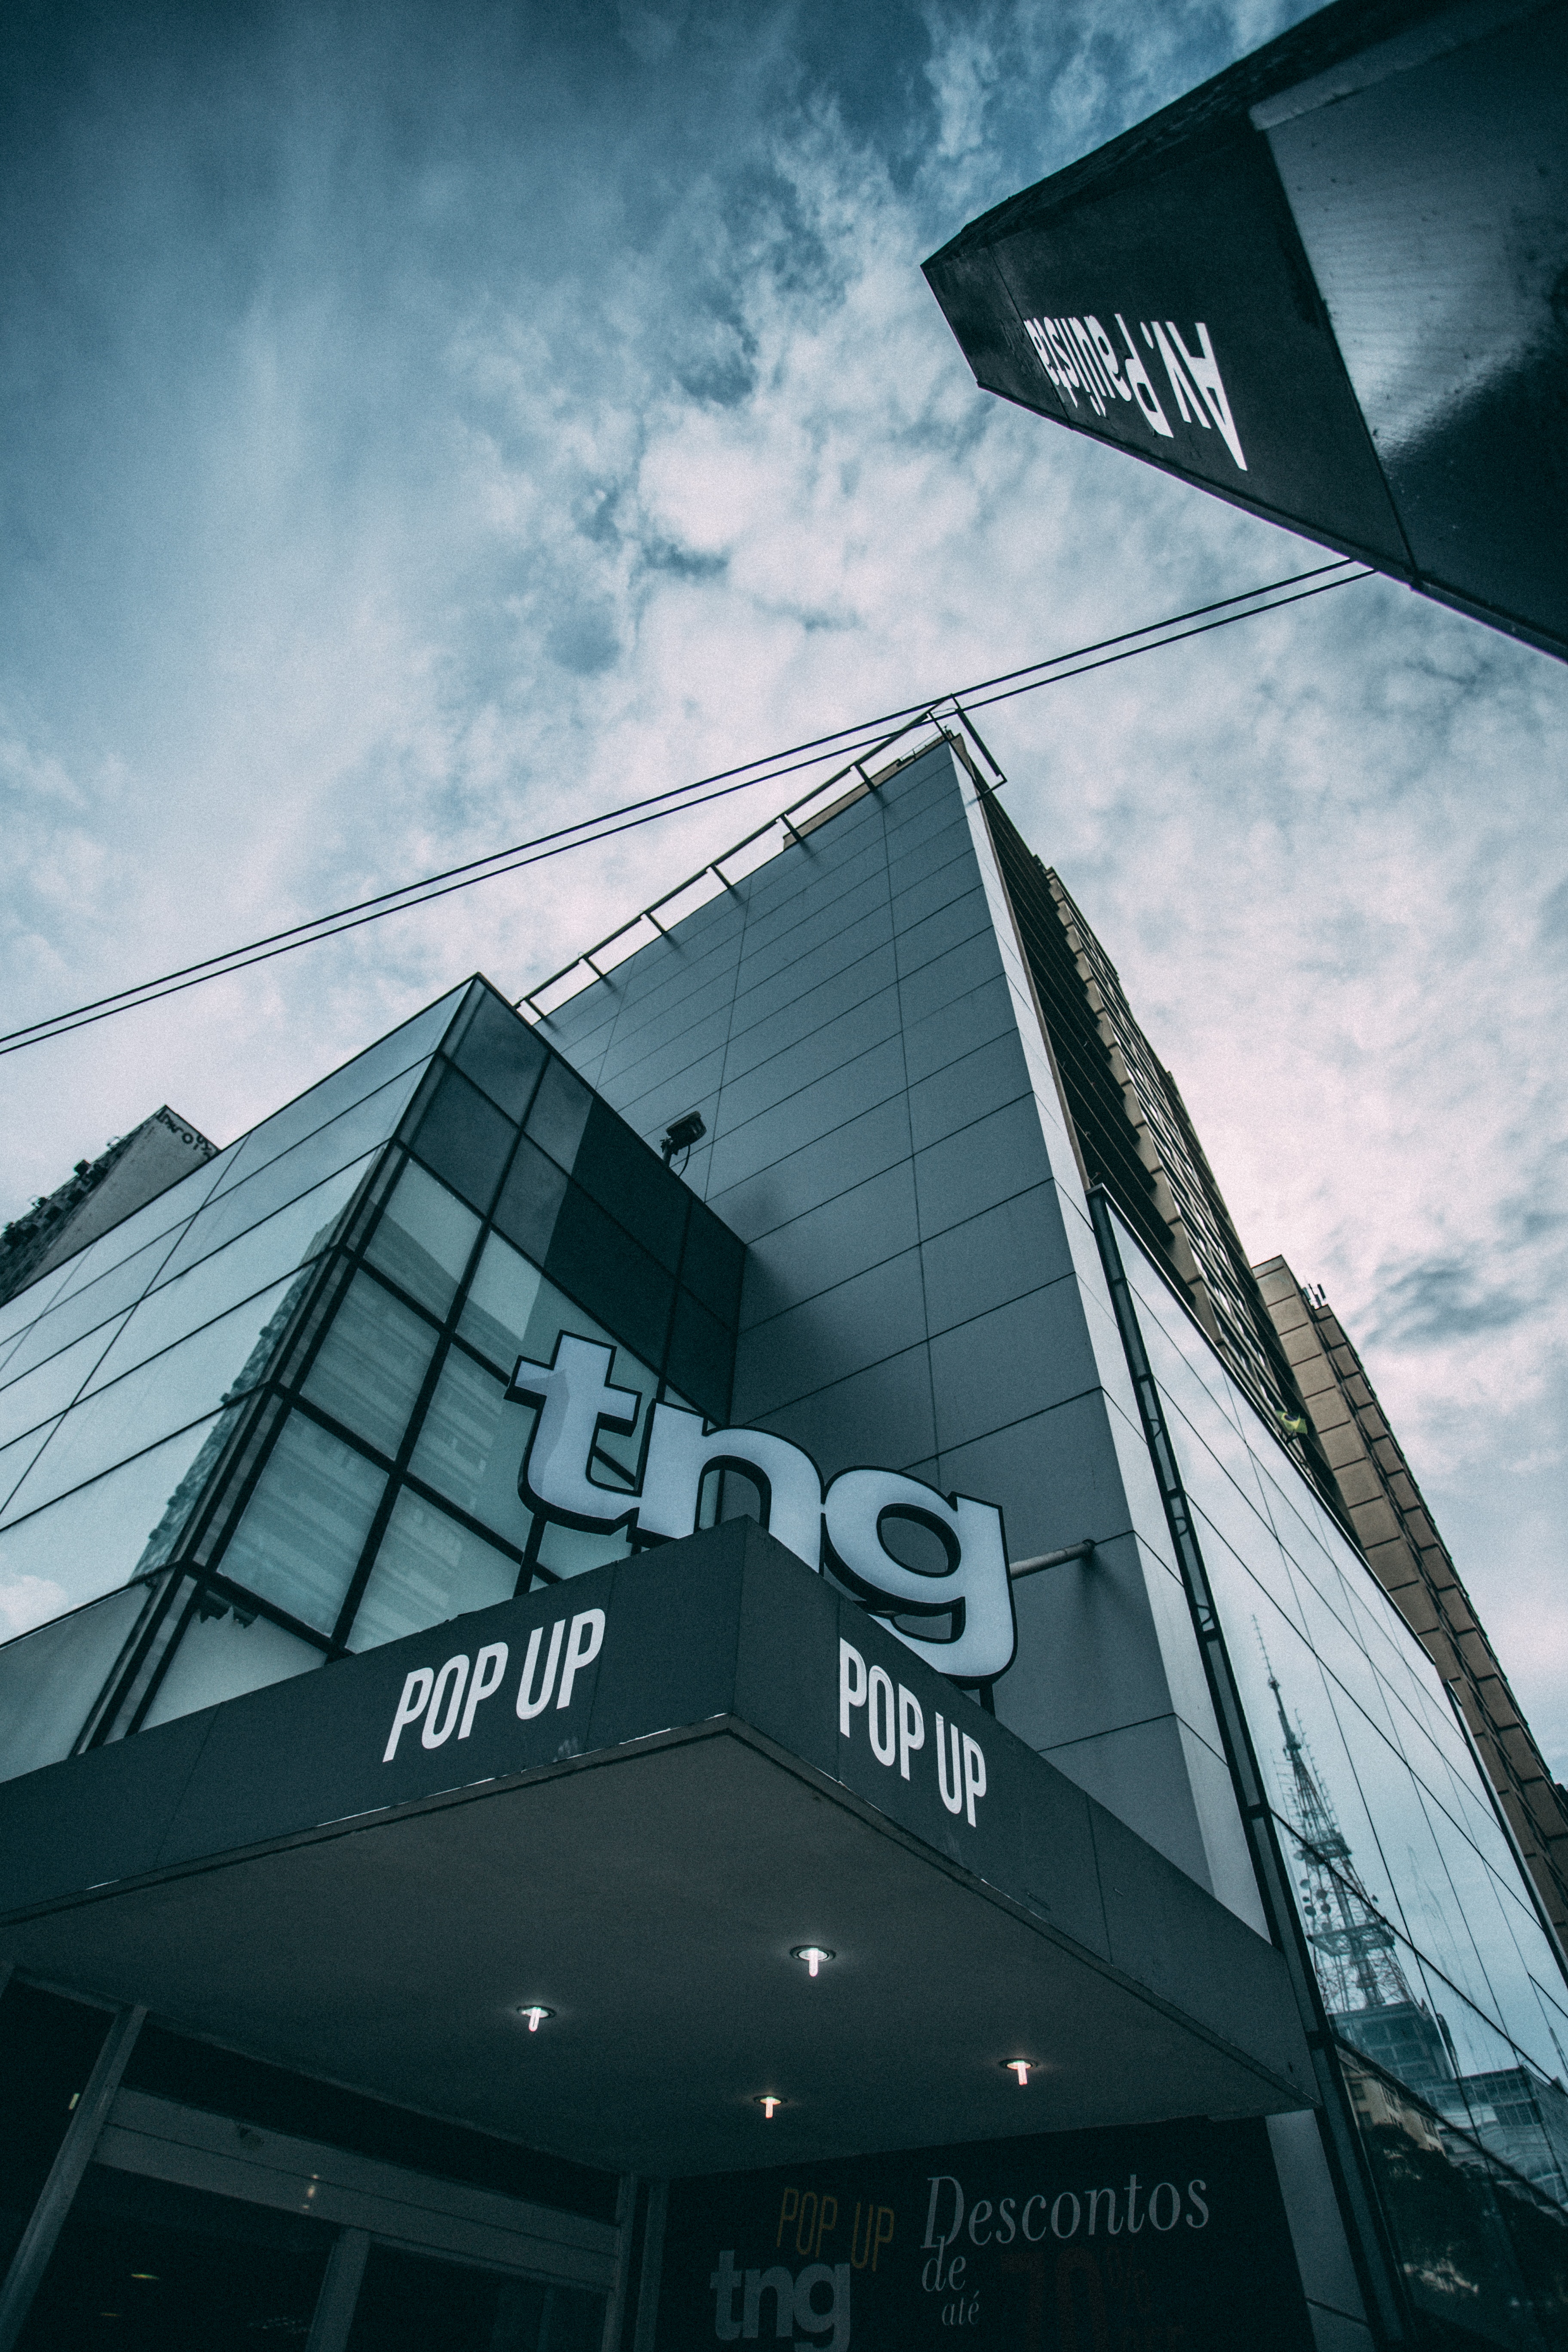 Tn pop up building during cloudy sky photo